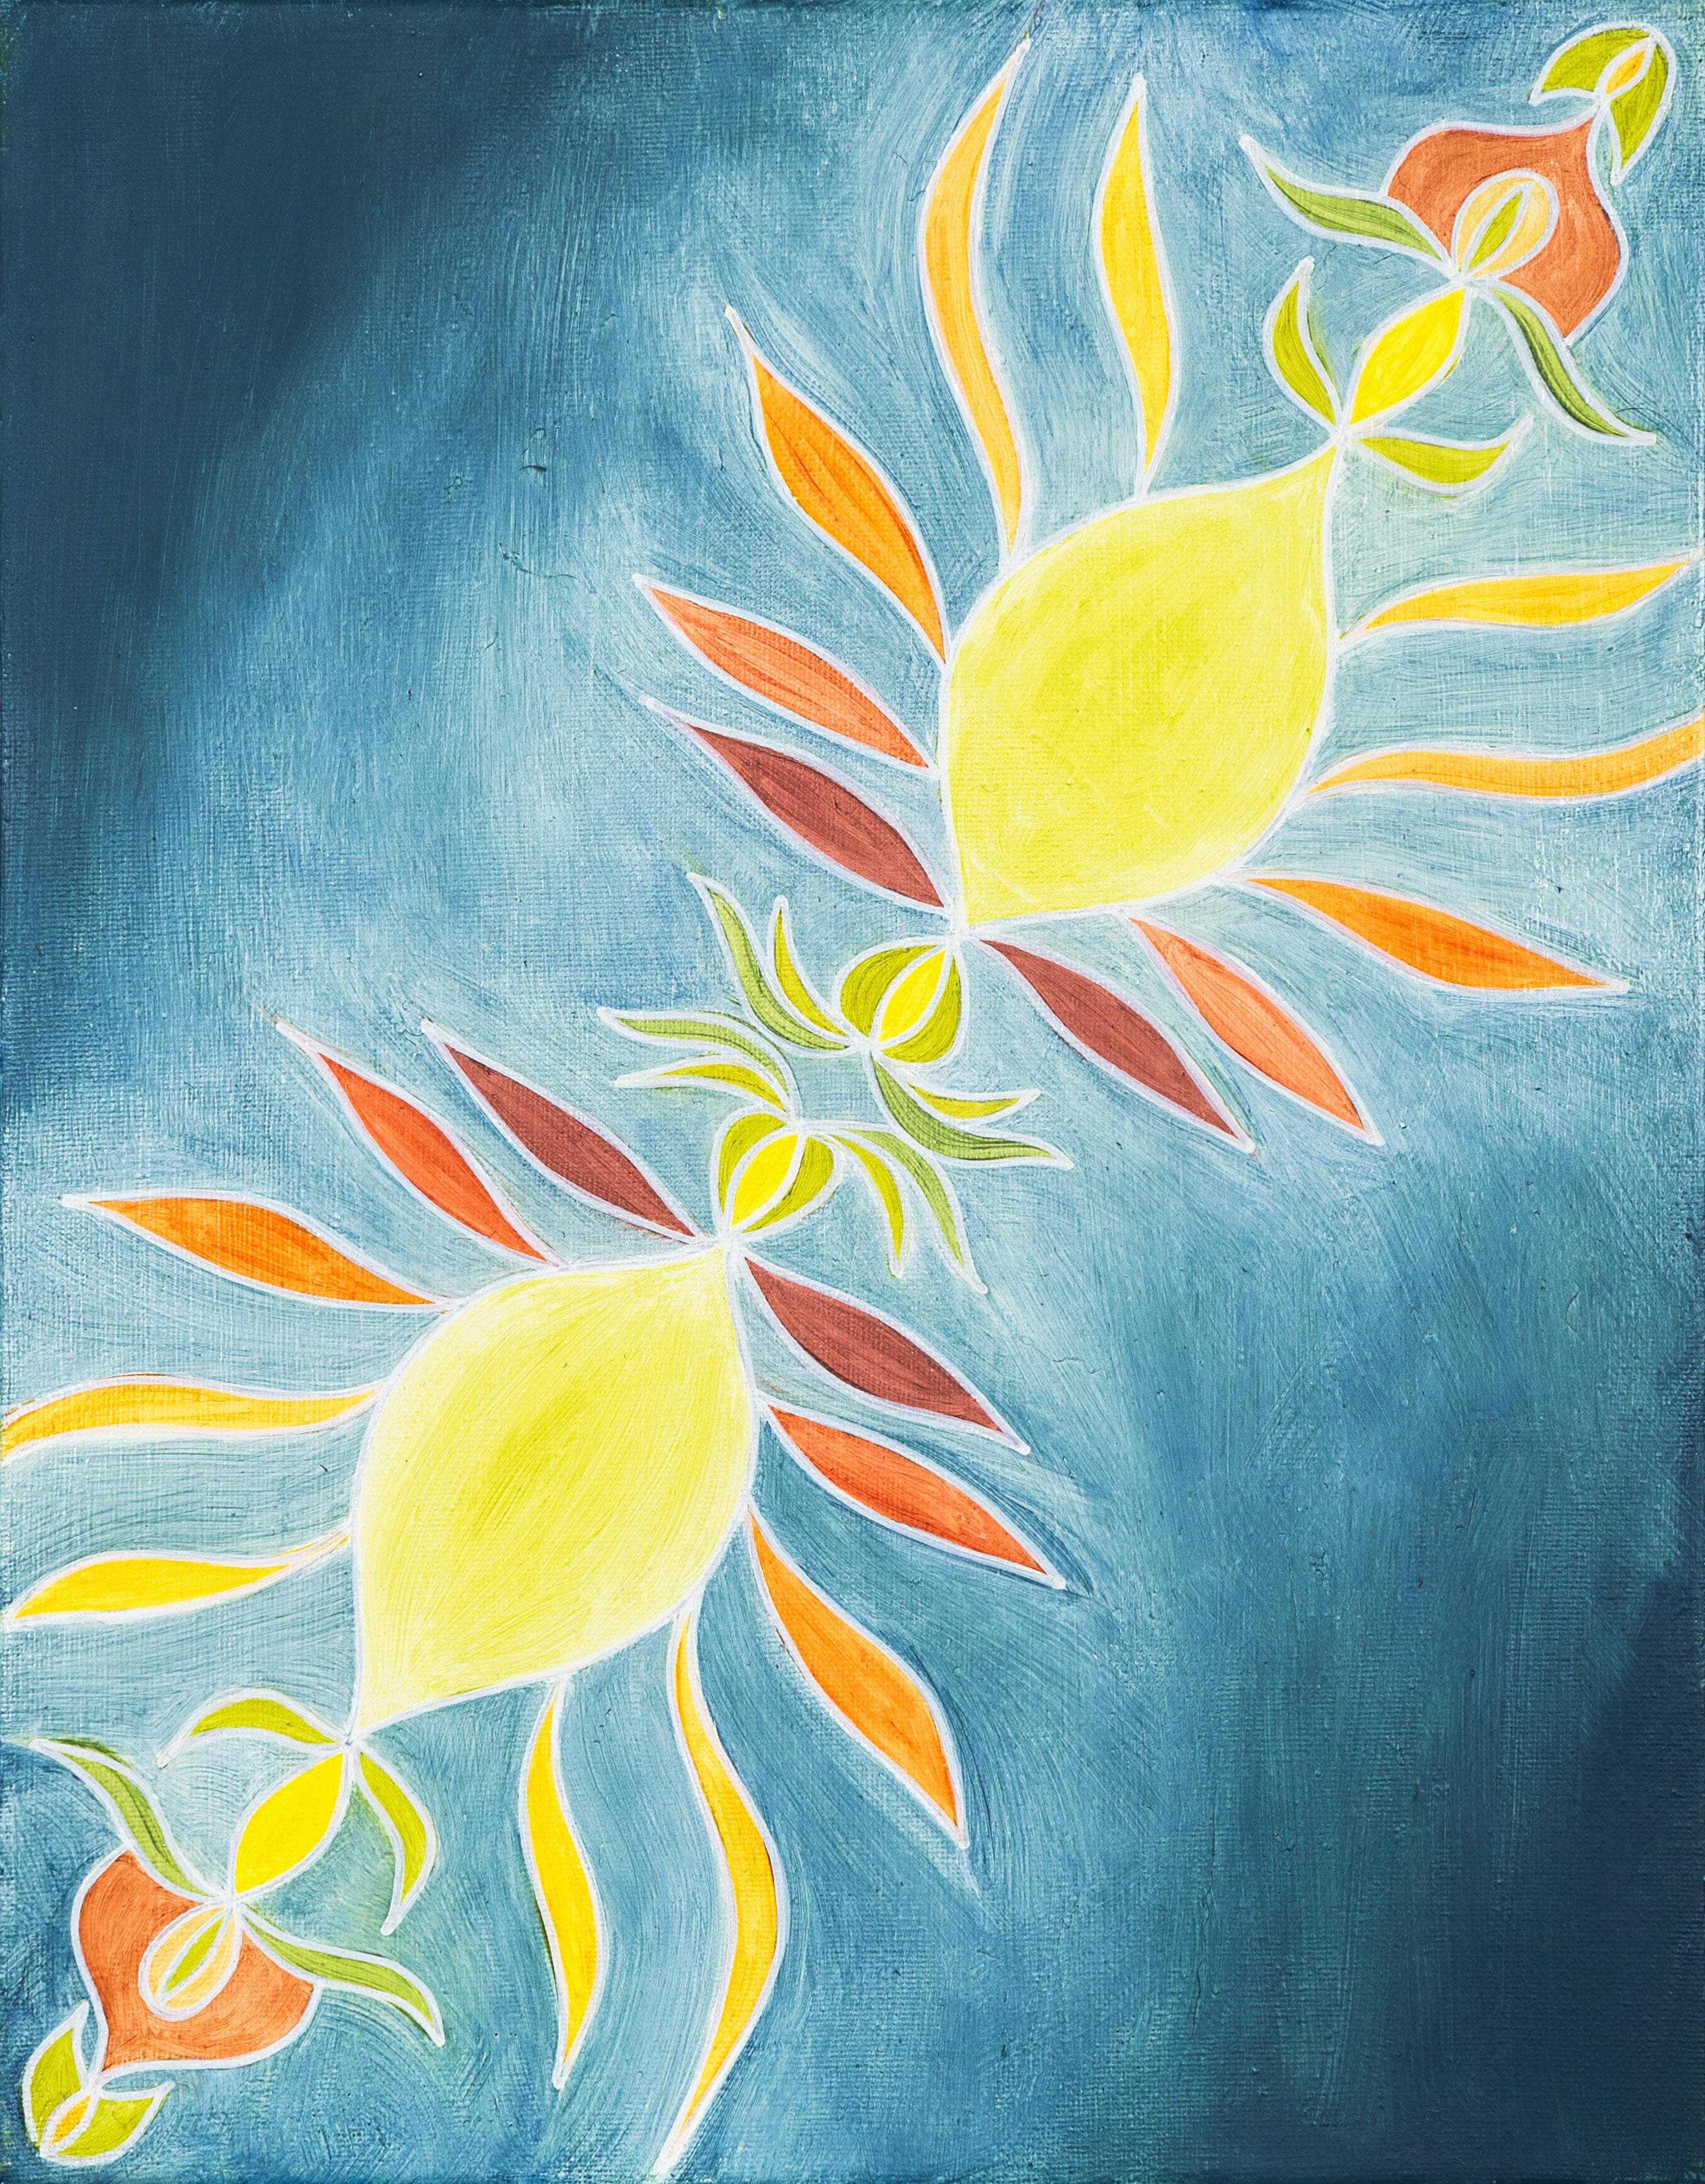 'Primordial Growth' is a 14 by 11 inch oil painting on canvas by Meagan Jain